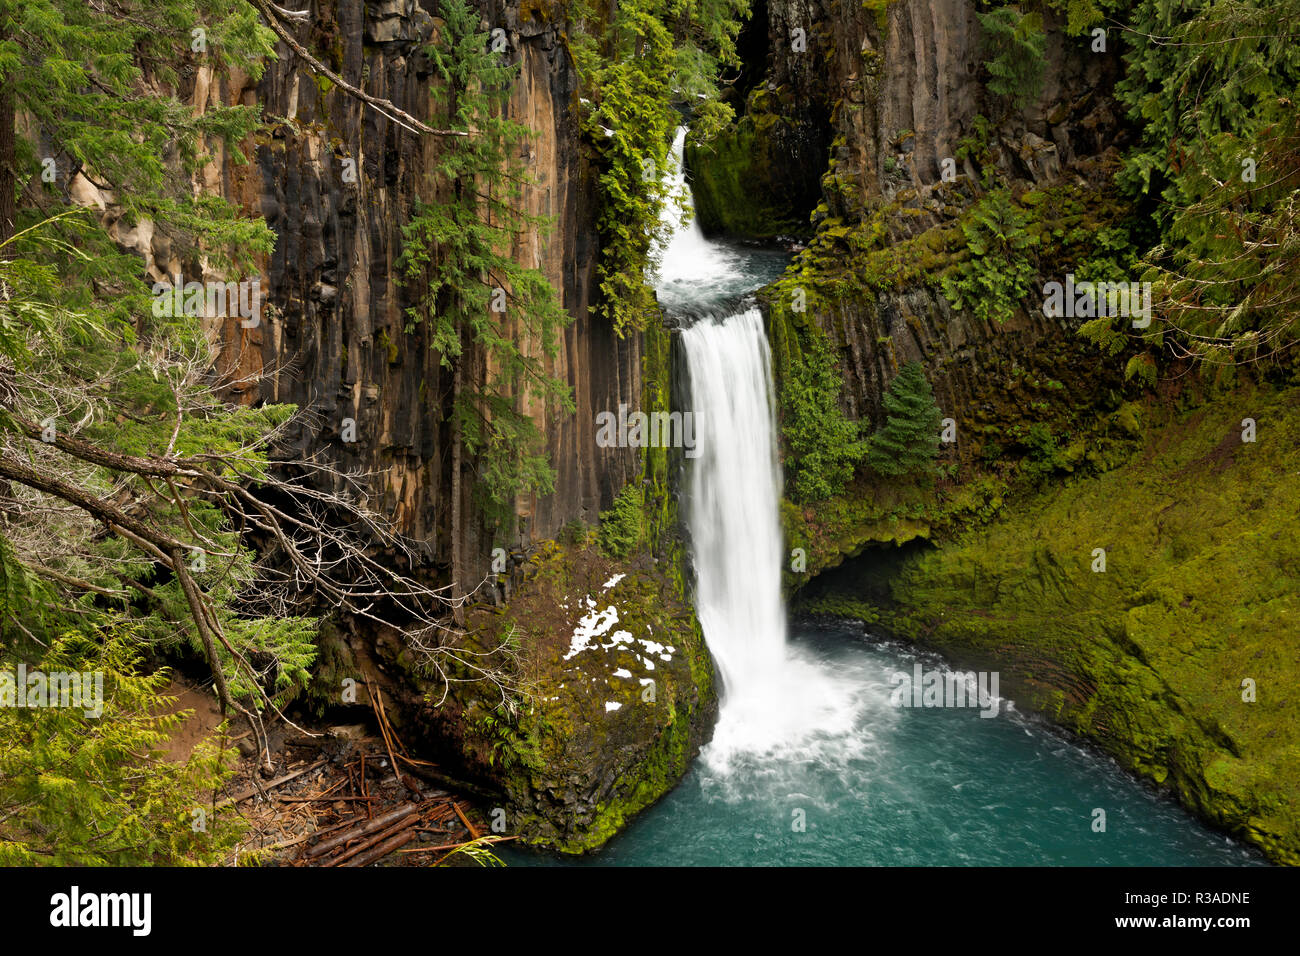 OR02459-00...OREGON - Toketee Falls surrounded by trees and columnar basalt on the Clearwater River in Umpqua National Forest. Stock Photo